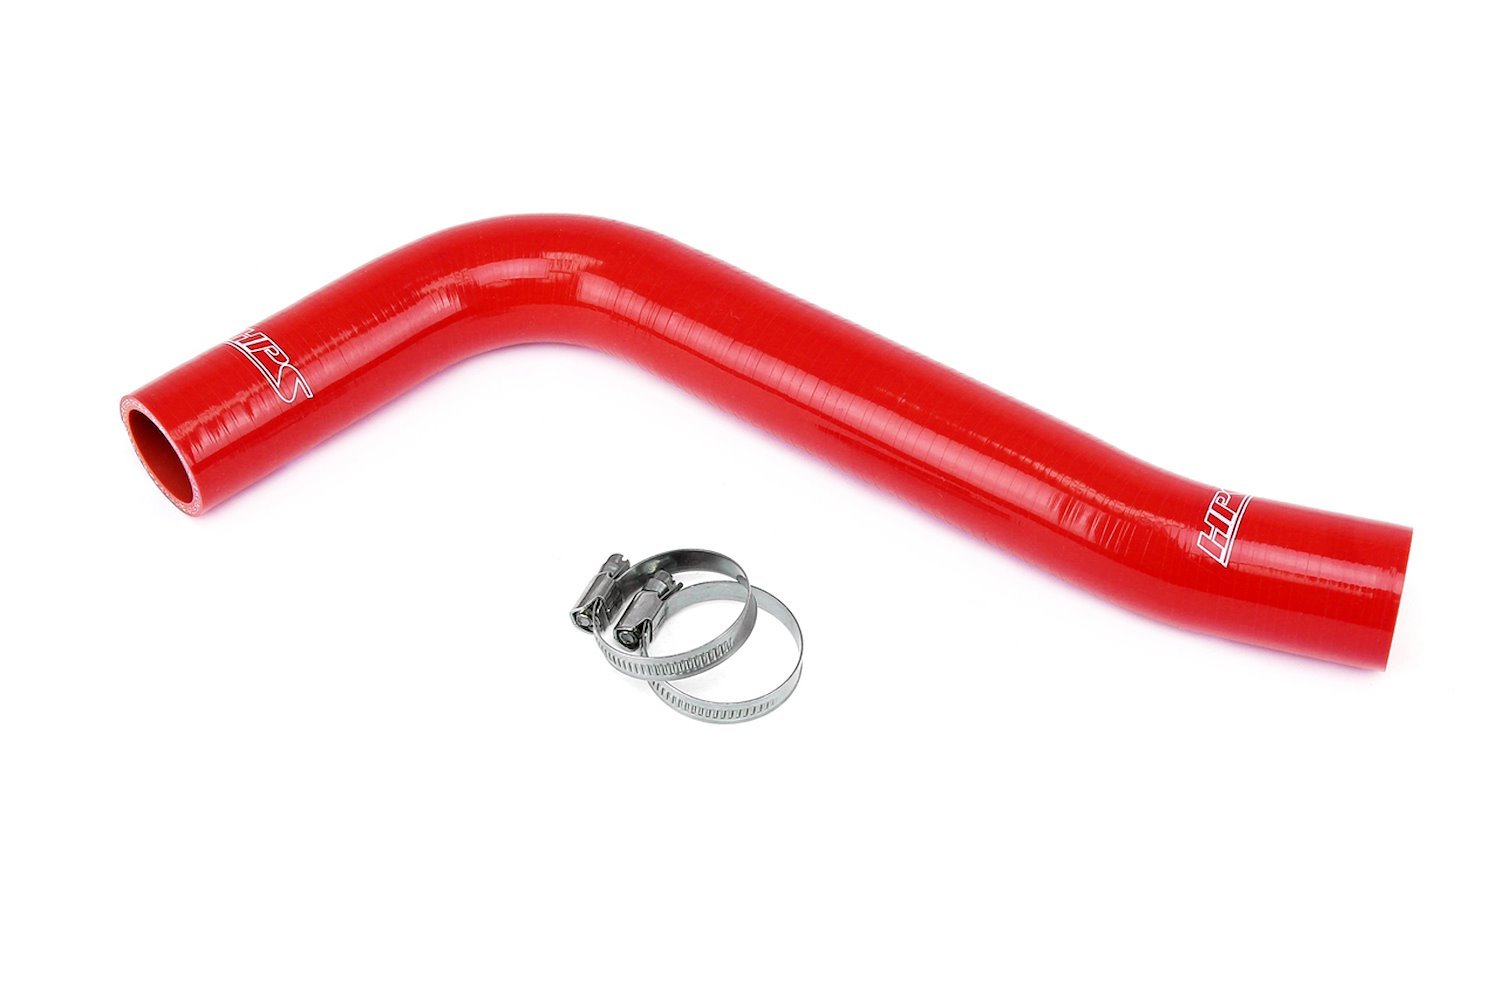 57-1215U-RED Radiator Hose Kit, 3-Ply Reinforced Silicone, Replaces Upper Rubber Radiator Coolant Hose.